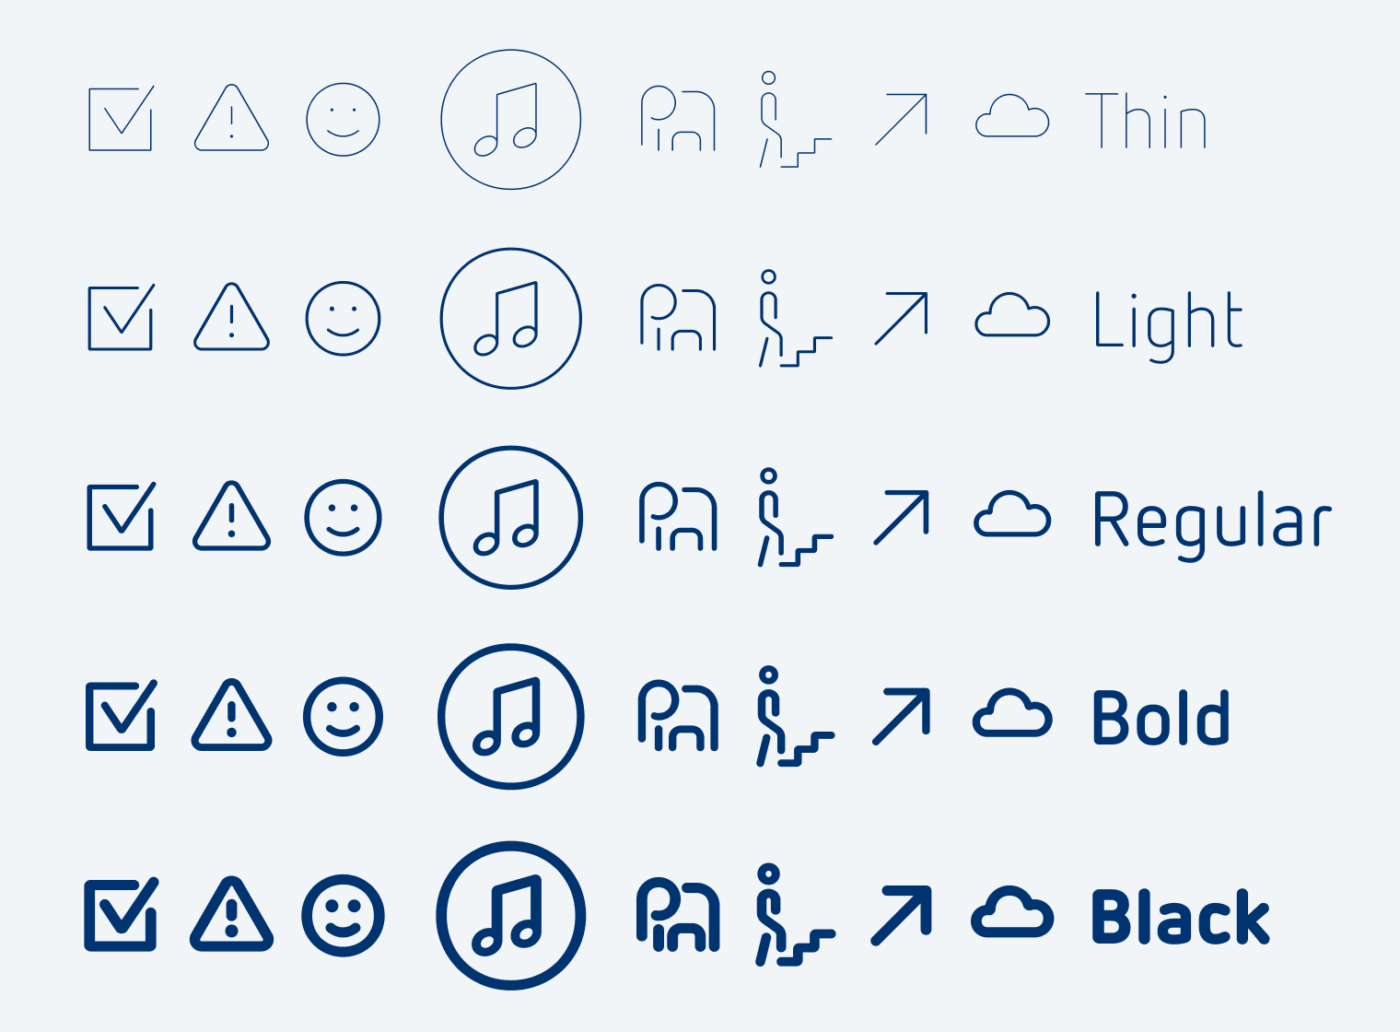 A few of Netto’s icons in Thin, Light, Regular, Bold, Black weight